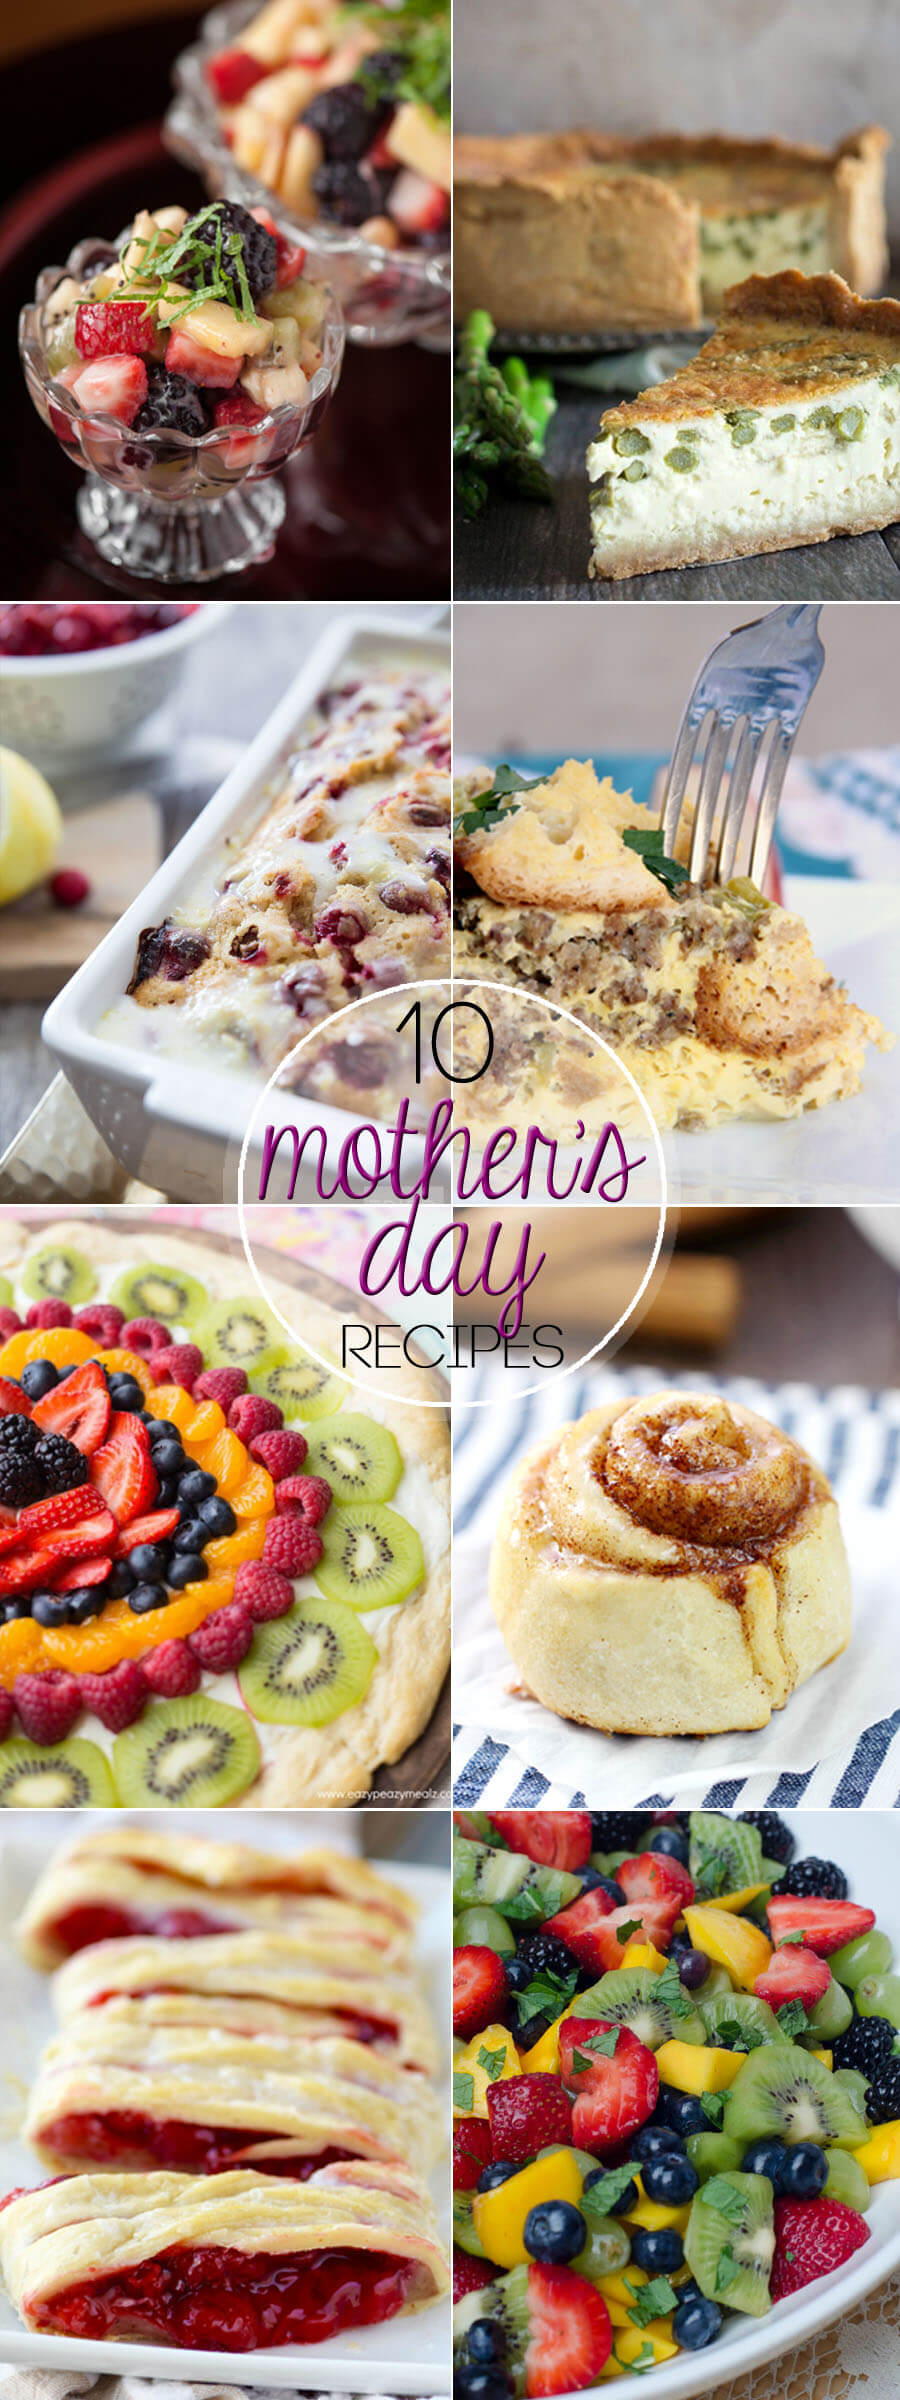 A collage of food images with overlay text 10 Great Mother's Day Recipes in your celebration.